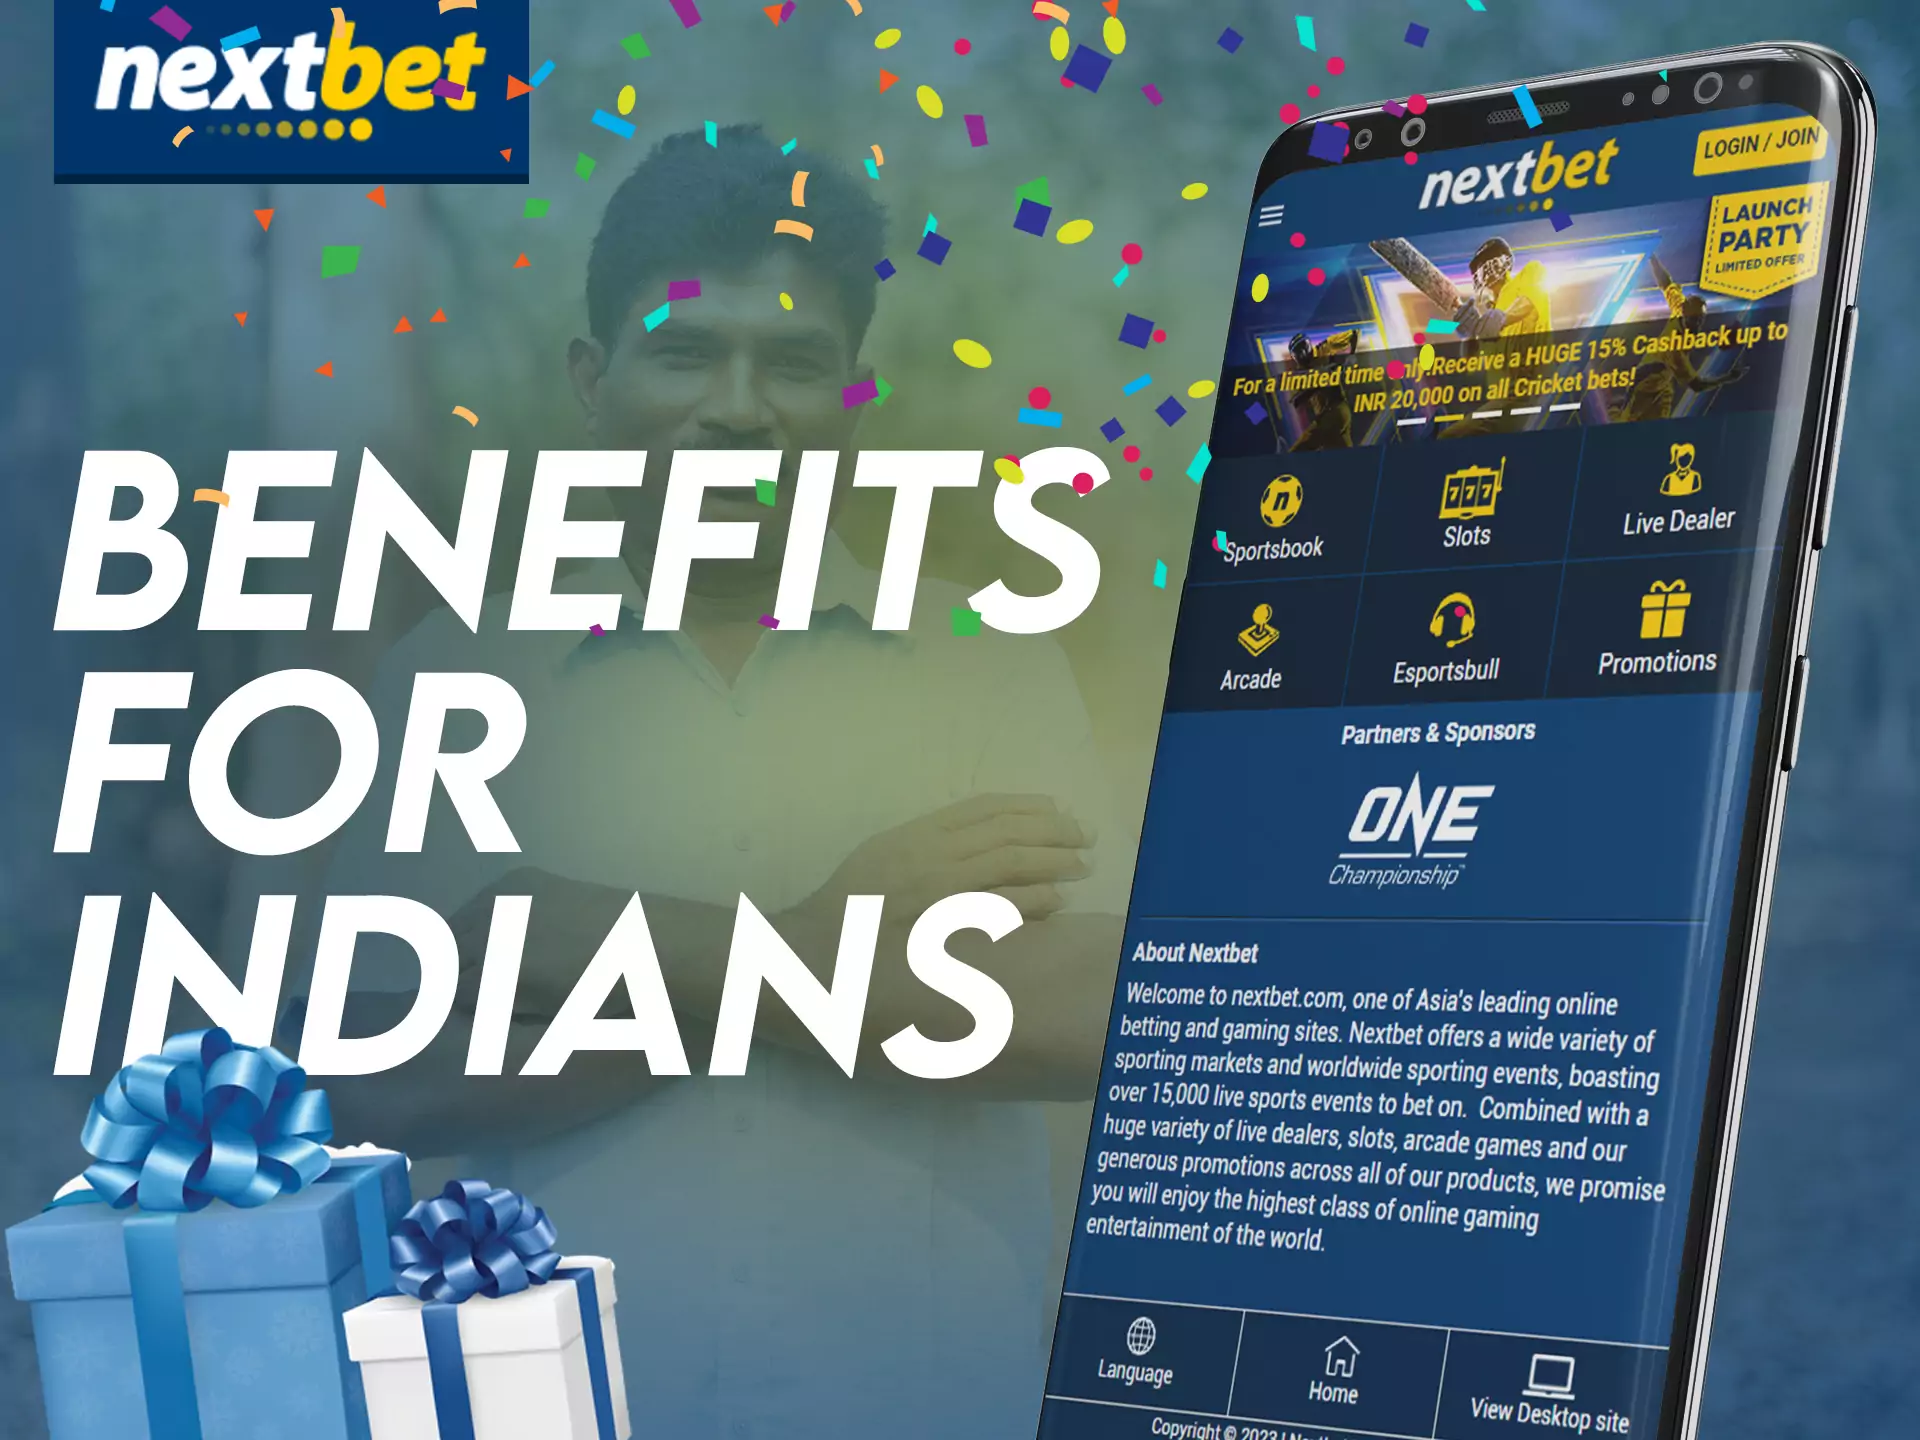 The Nextbet app offers many nice bonuses and features to players from India.